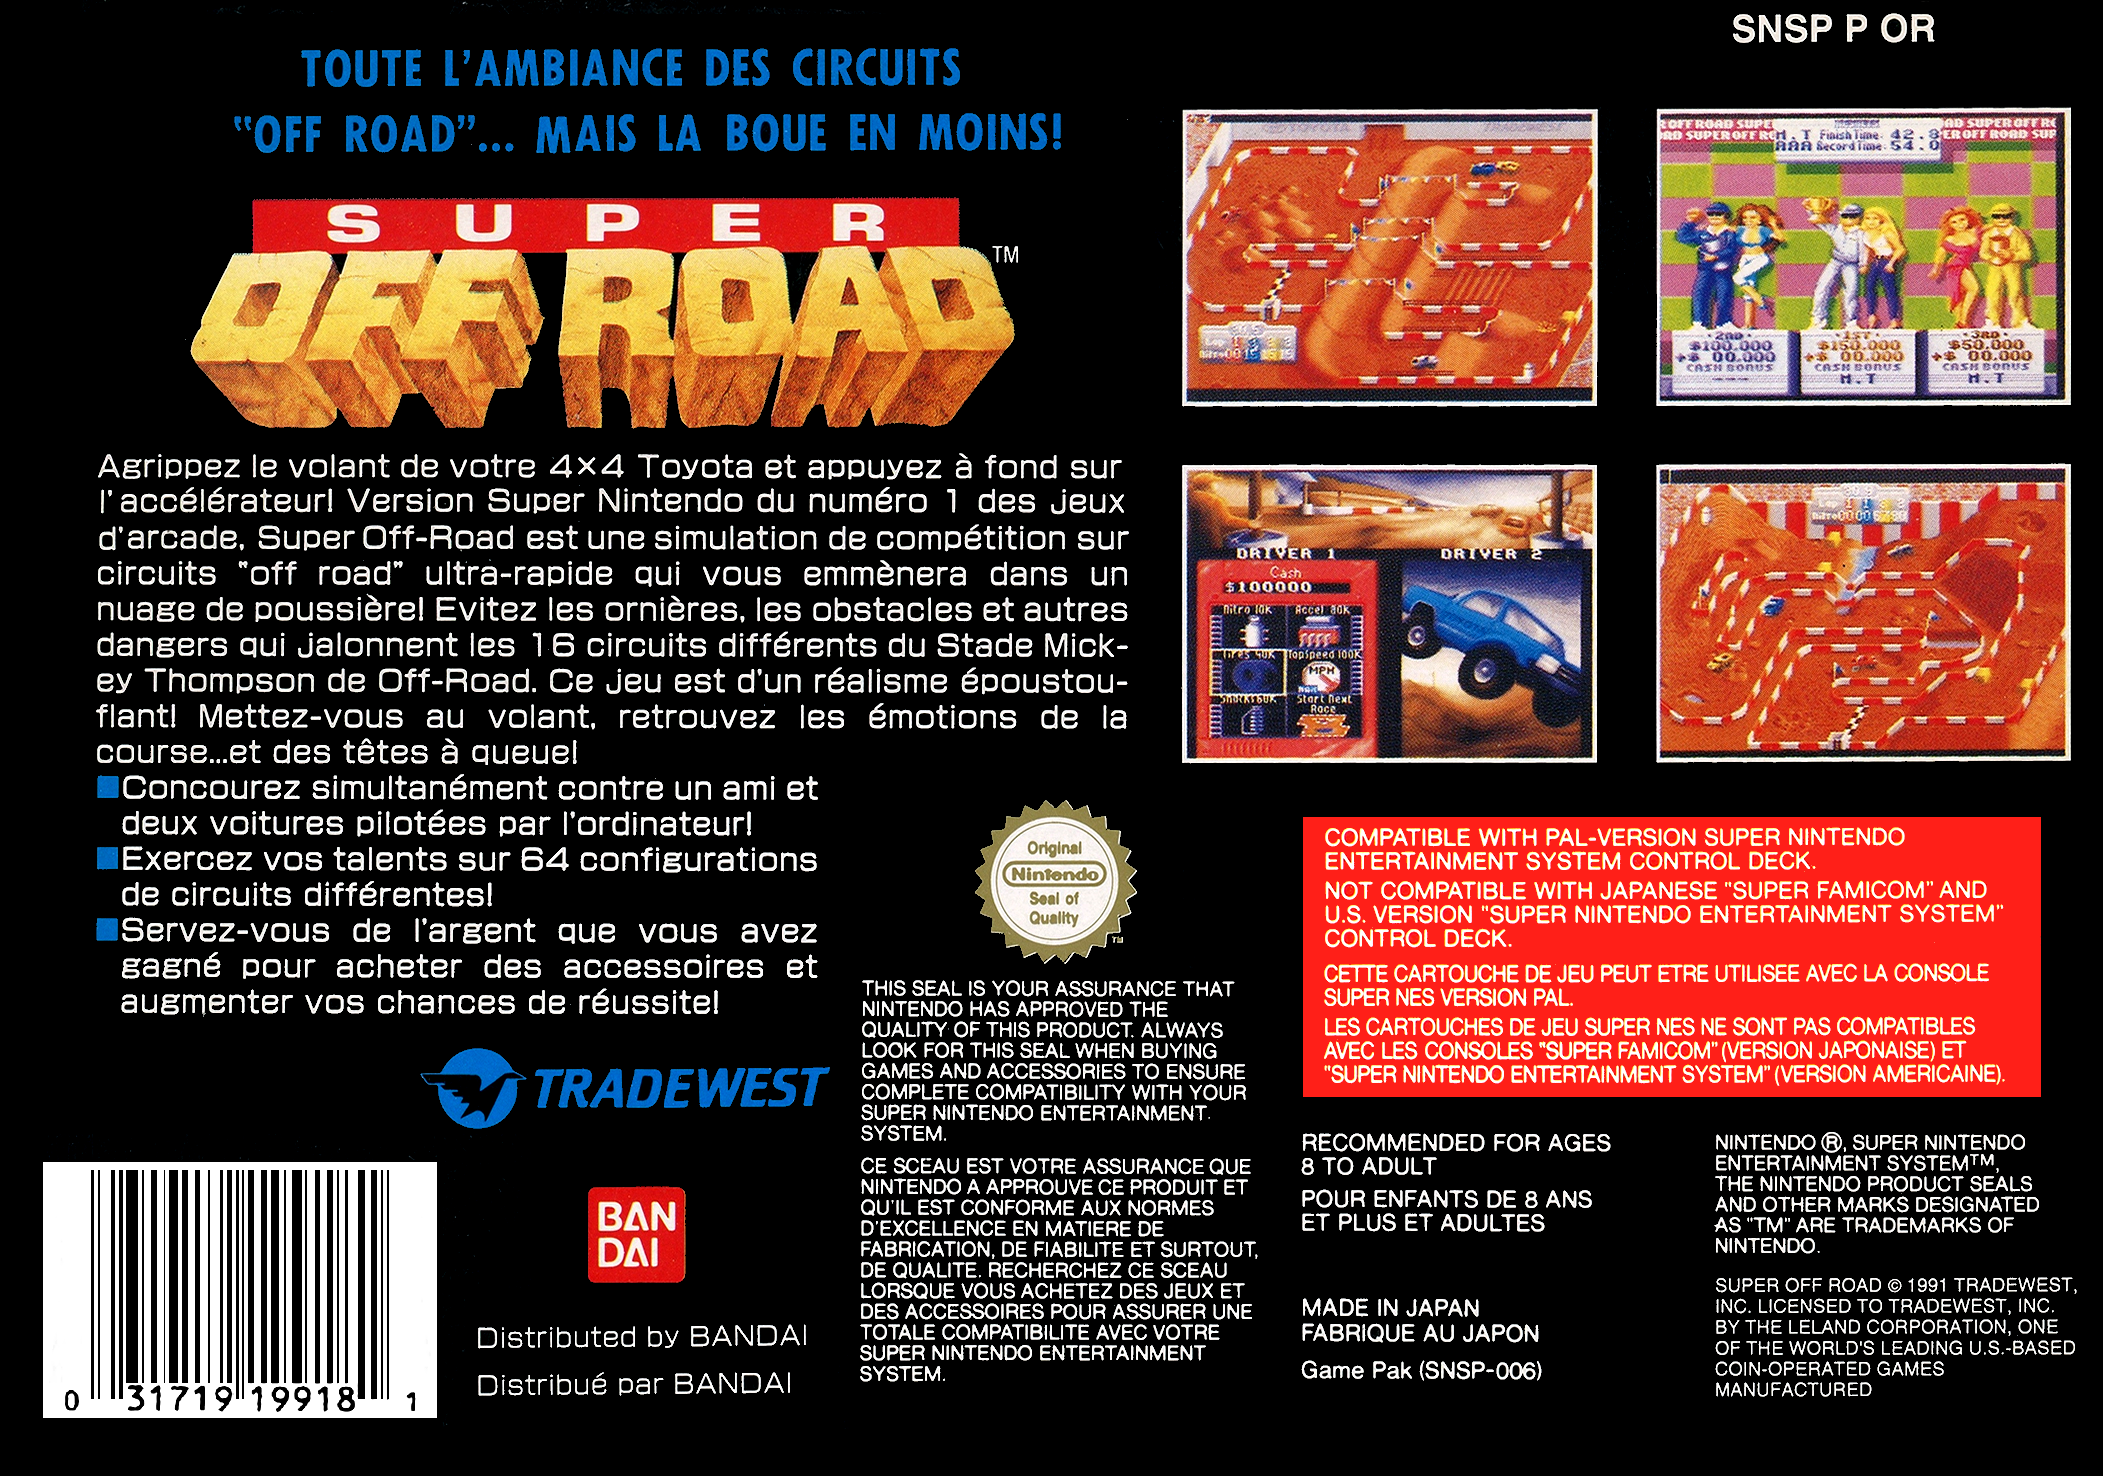 Super Off Road arcade game - Fonts In Use